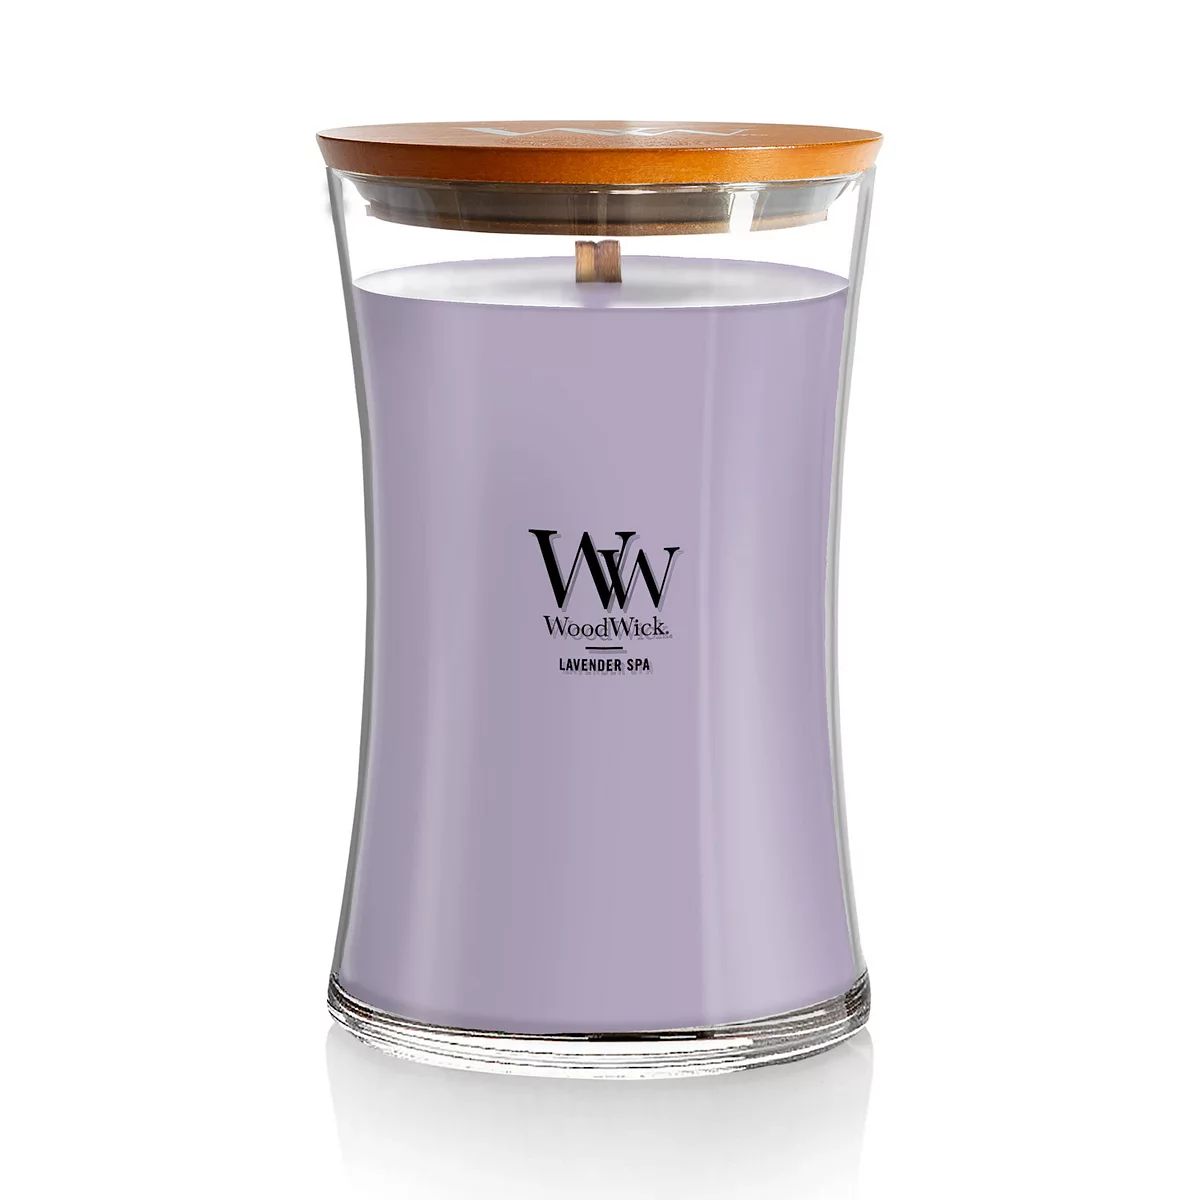 Woodwick Lavender Spa Medium Hourglass Candle | Kohl's